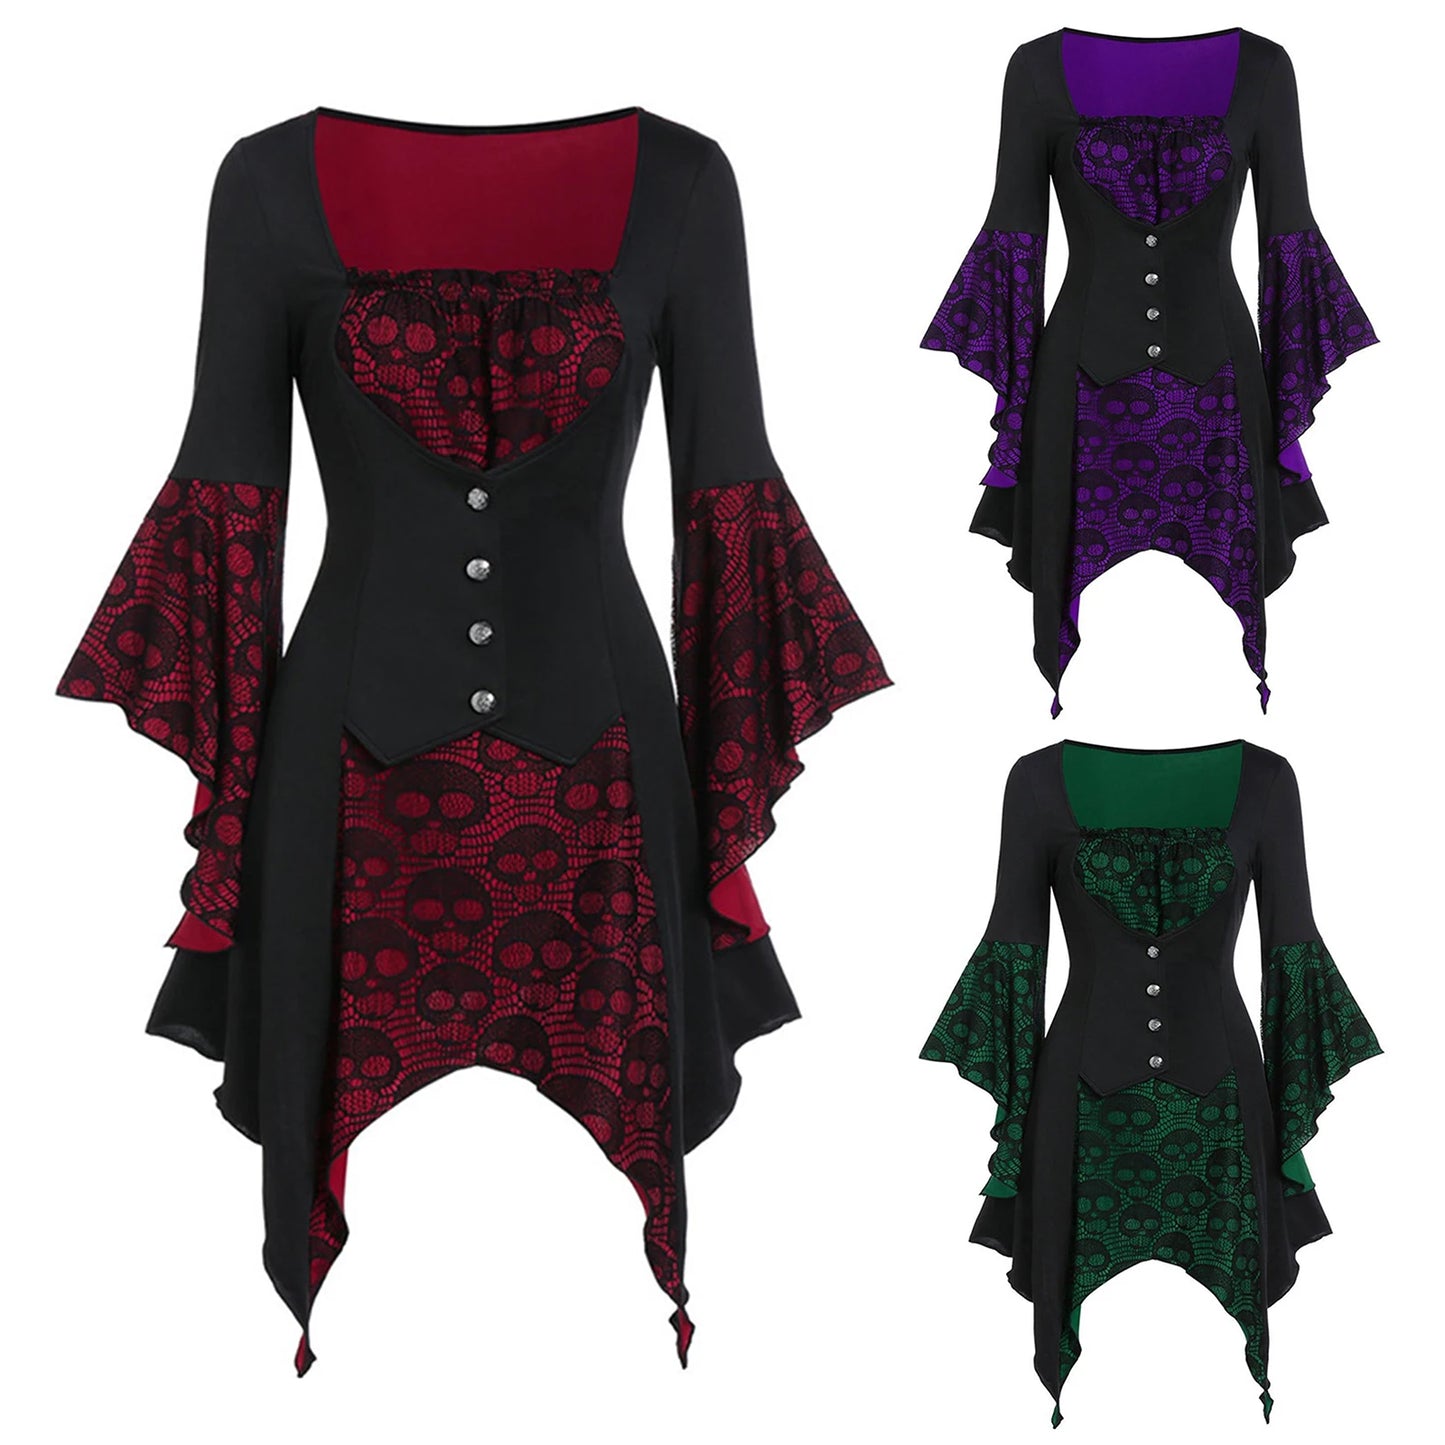 Womens Vintage Dresses Gothic Skull Lace Print Halloween Cosplay Party Dress Long Sleeve Bandage Medieval Renaissance Costumes